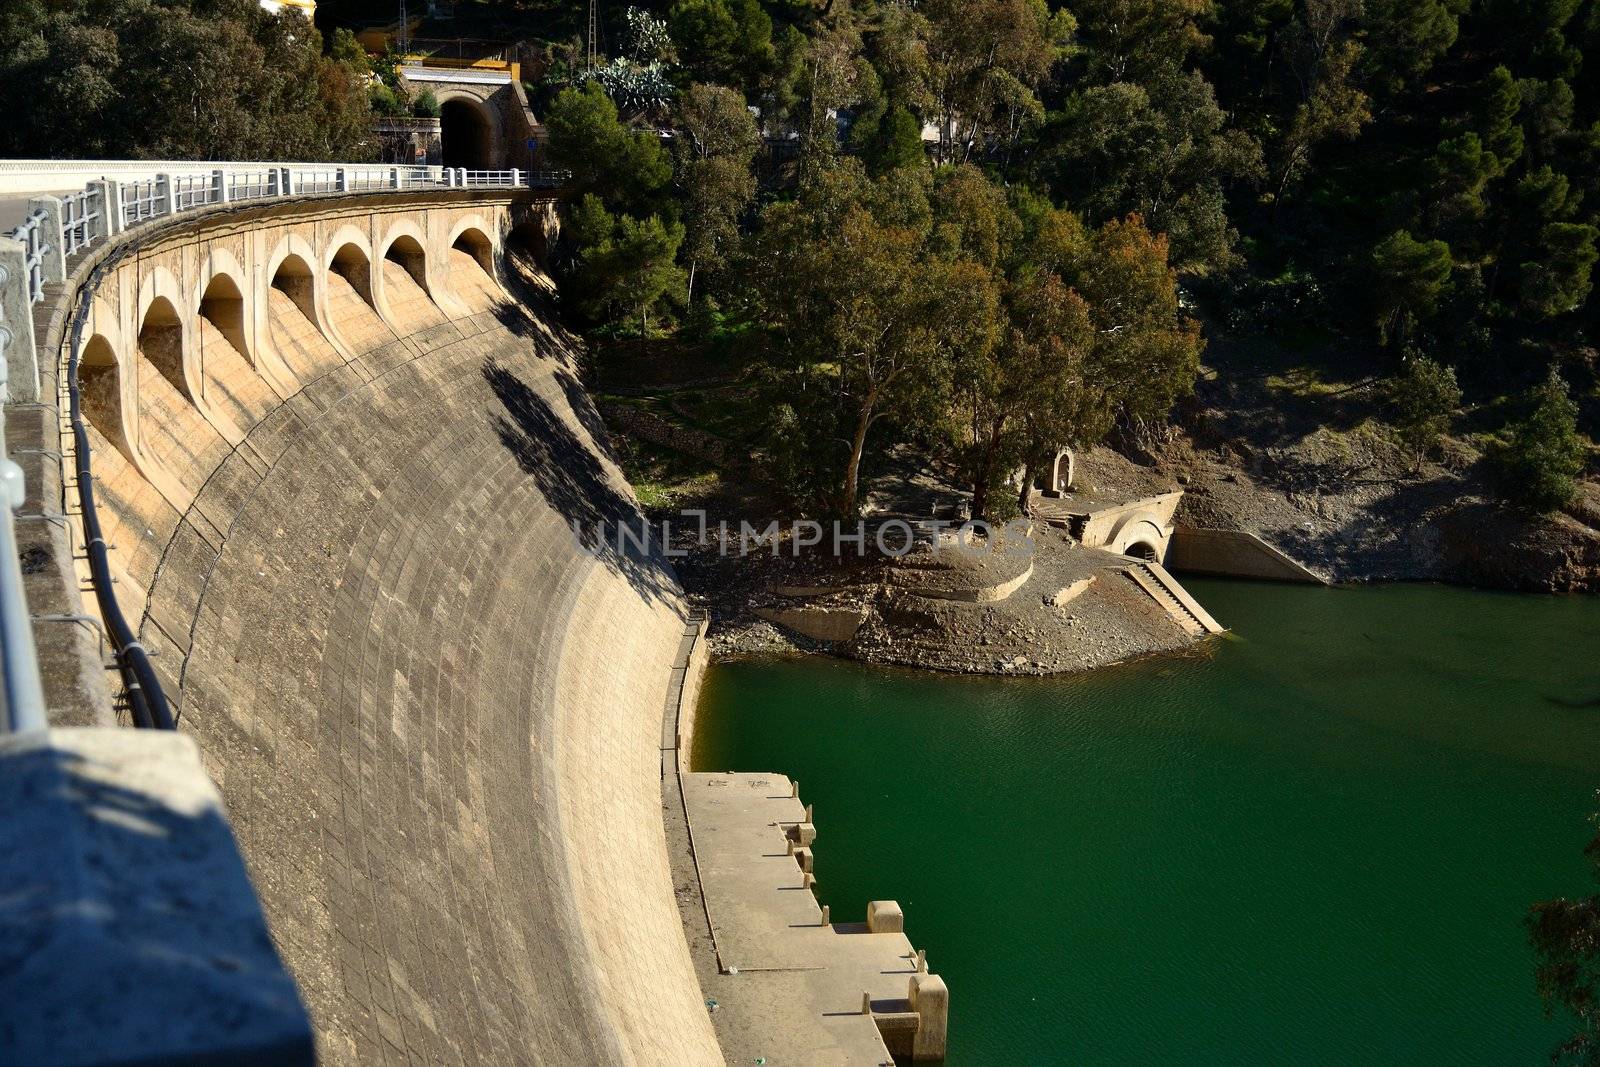 dam reservoir of drinking water for the city of Malaga